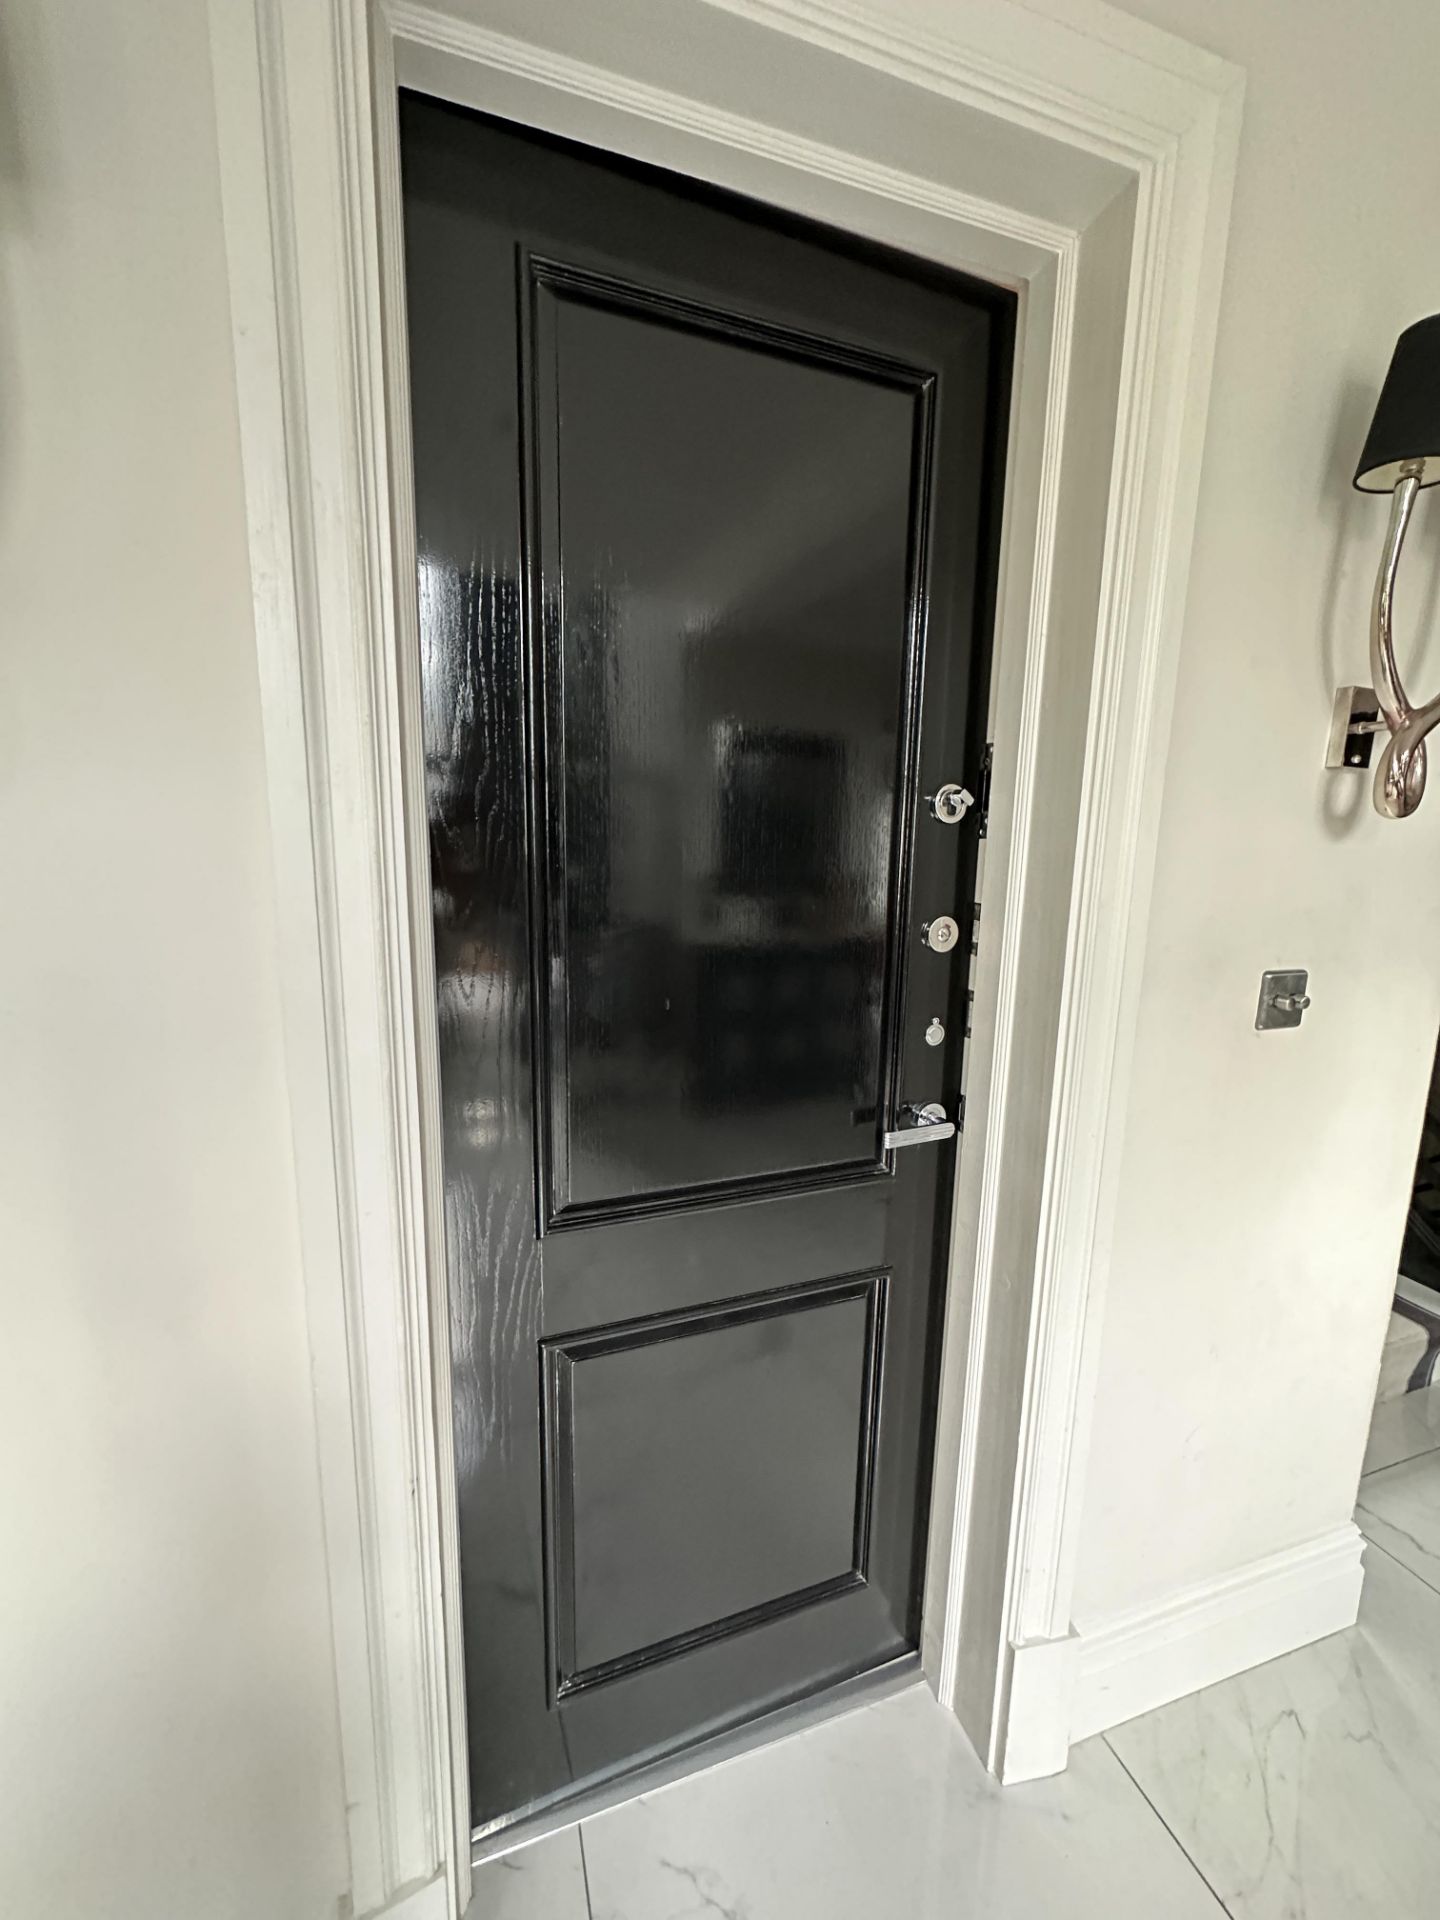 1 x SOLID OAK Fire Door In Black Gloss And Stainless Steel Hardware